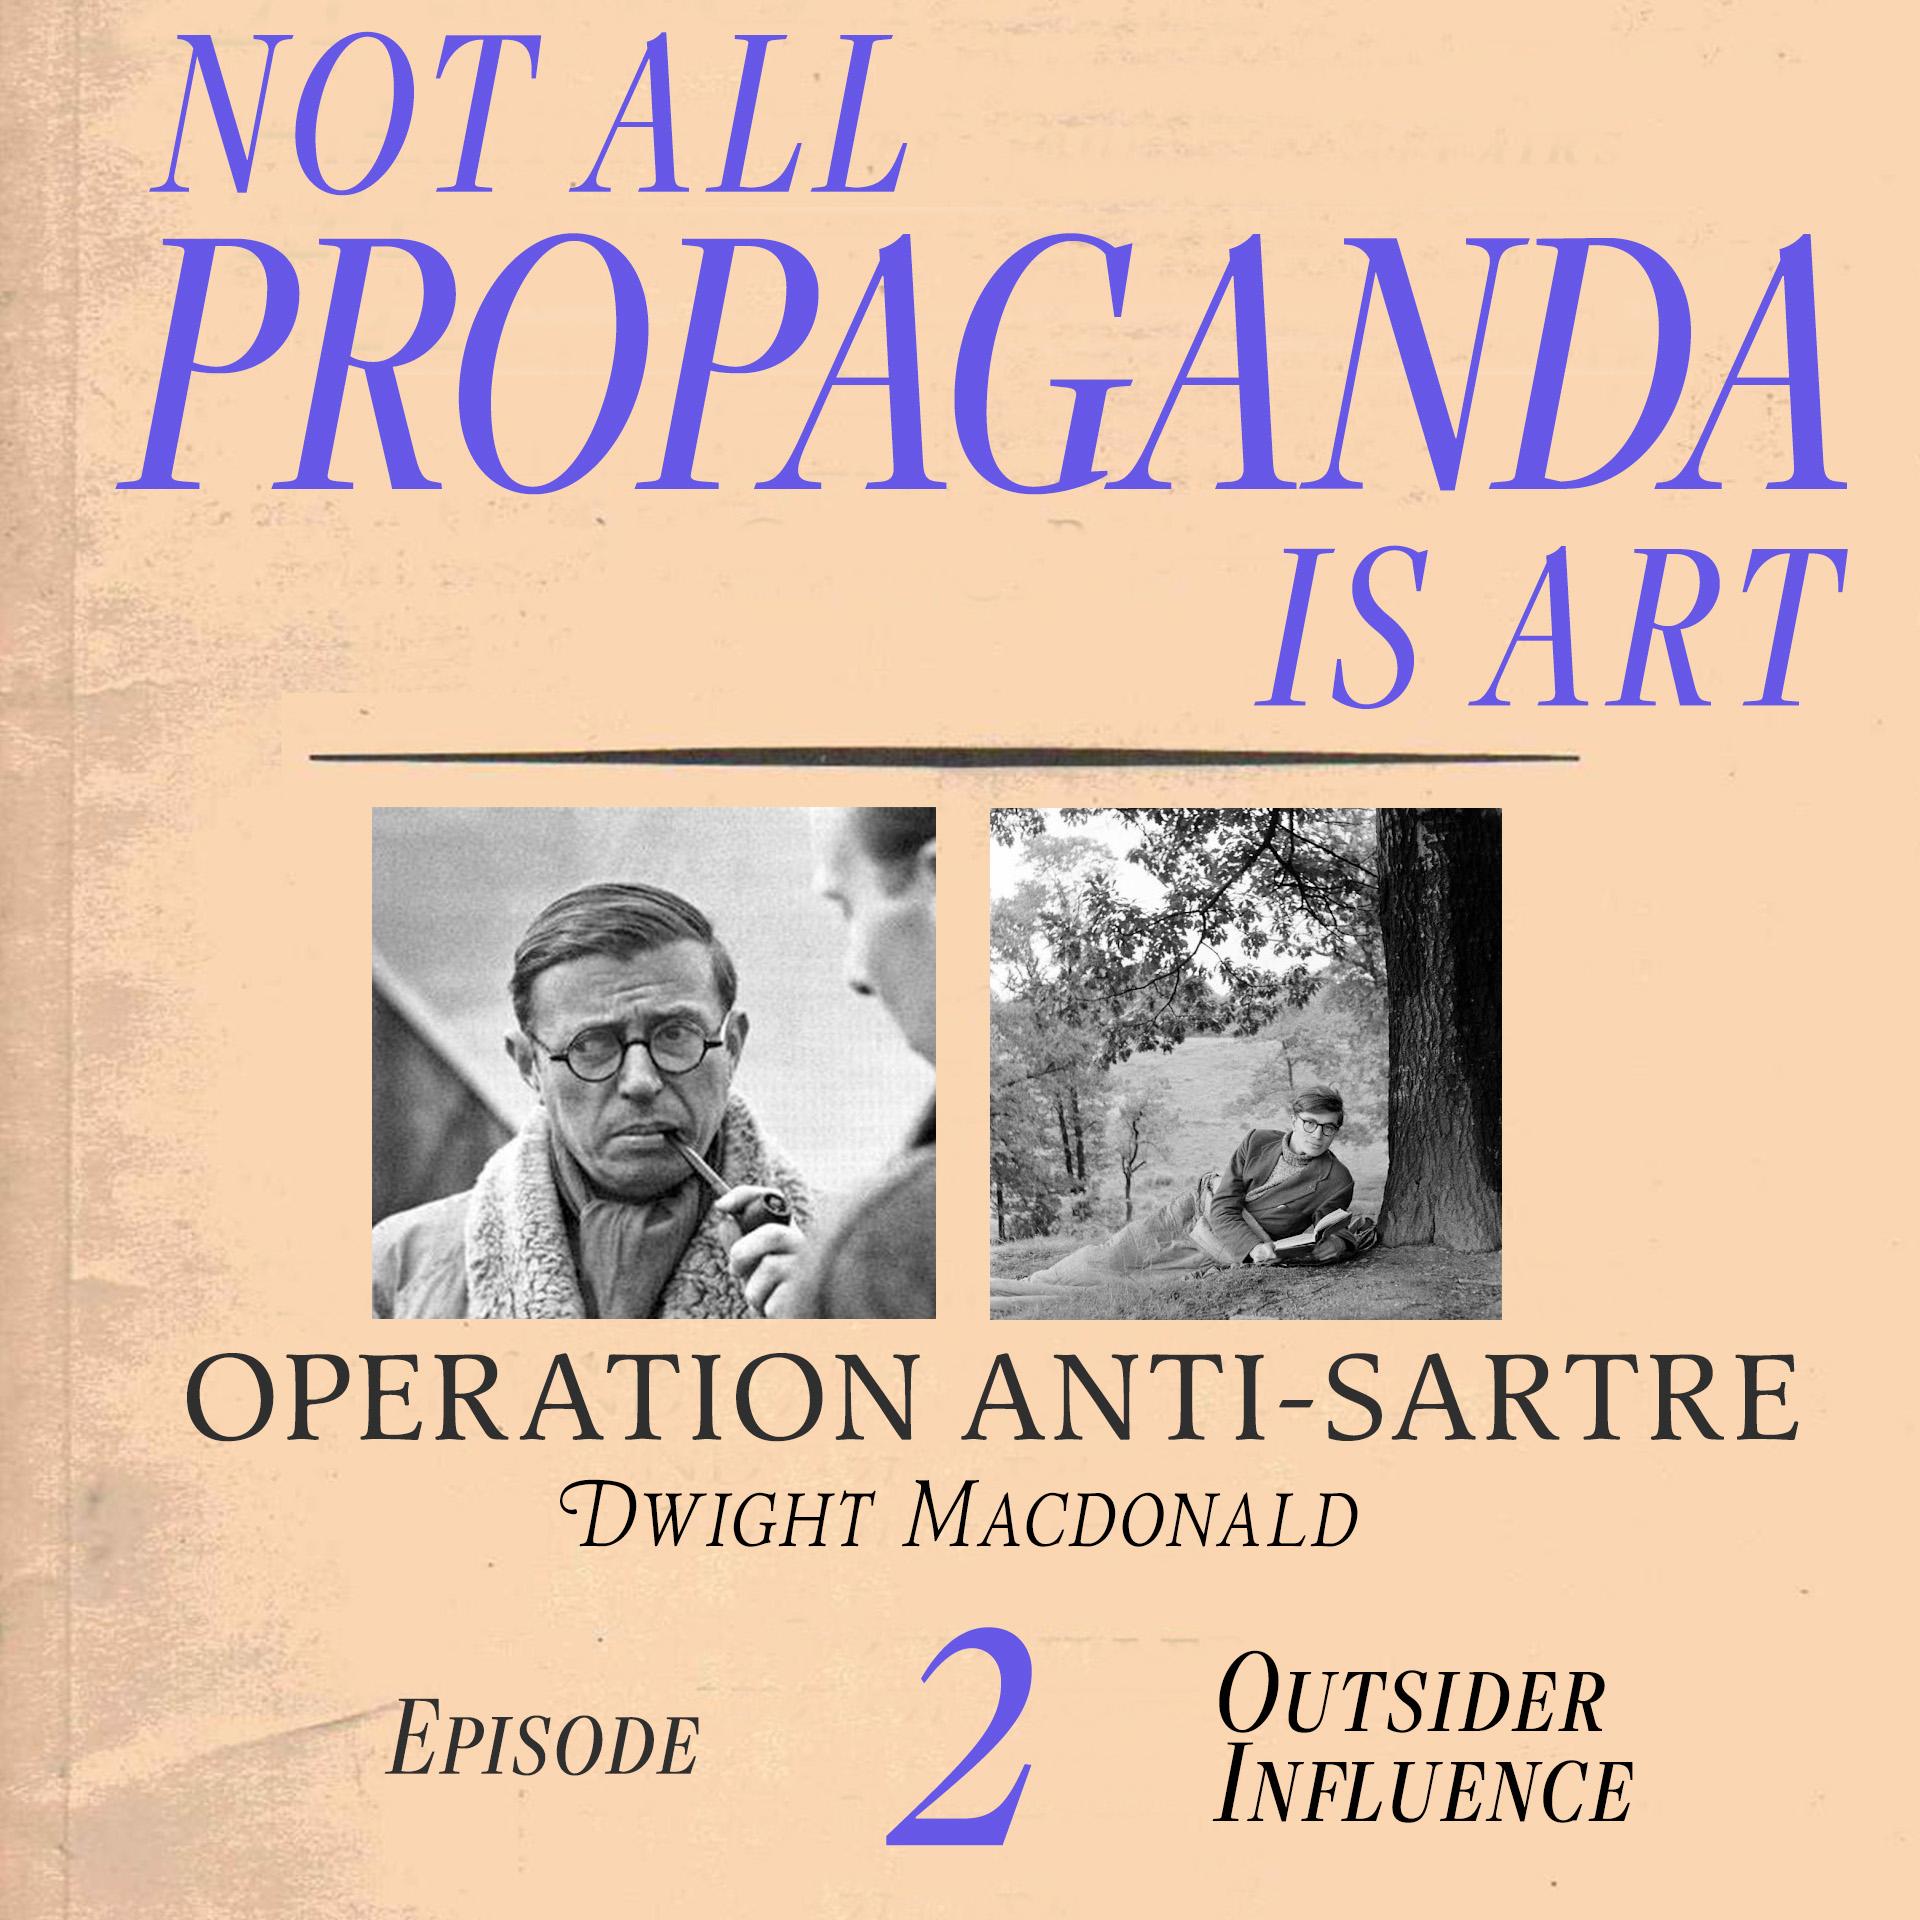 Thumbnail for "Not All Propaganda is Art 2: Outsider Influence".